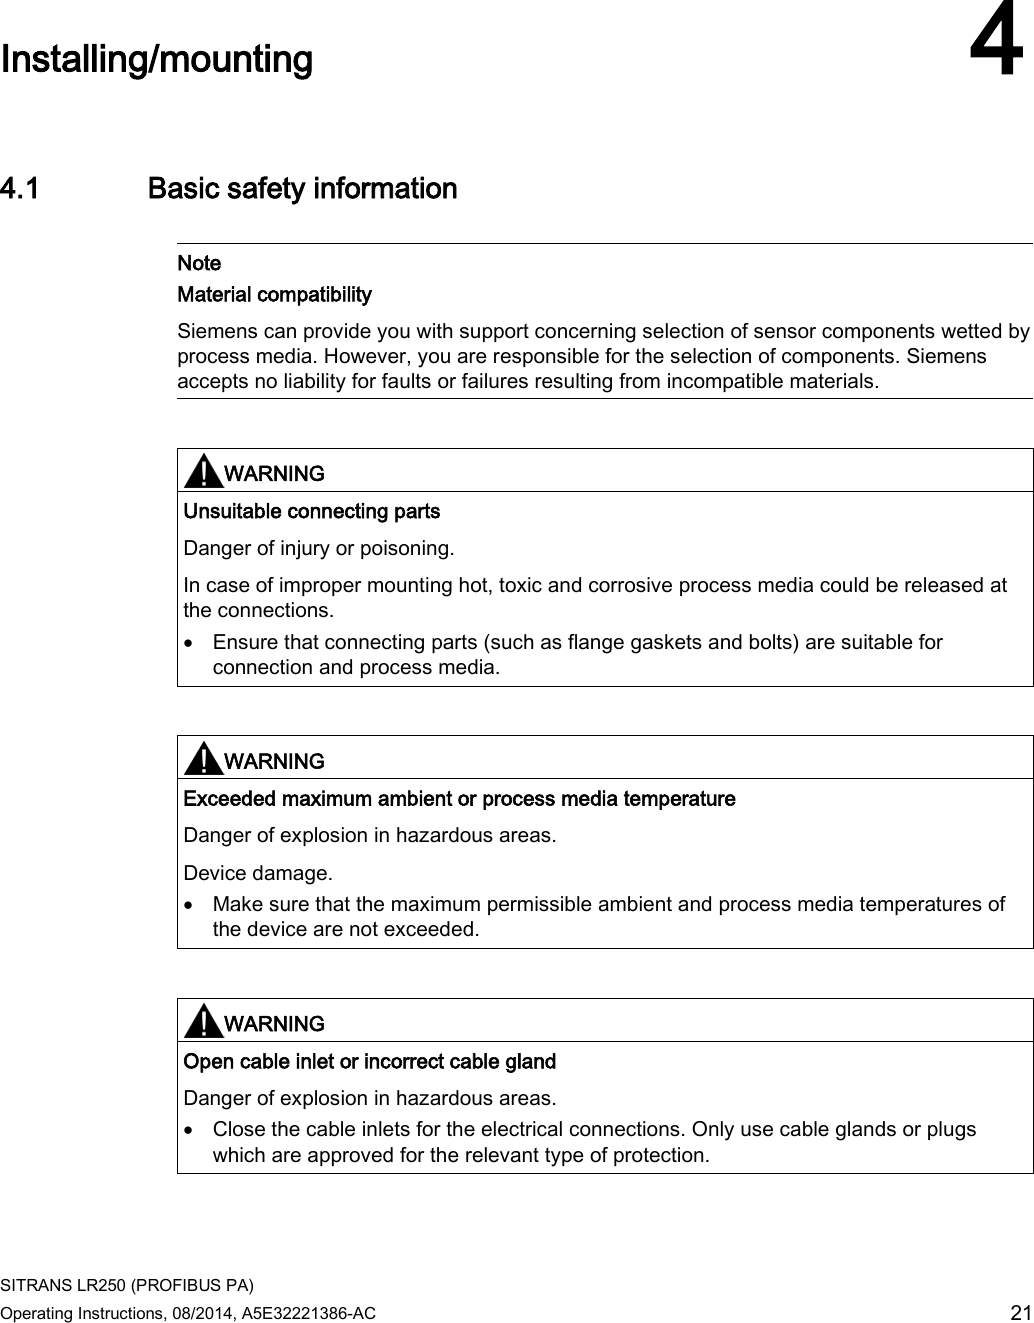  SITRANS LR250 (PROFIBUS PA) Operating Instructions, 08/2014, A5E32221386-AC 21  Installing/mounting 4 4.1 Basic safety information   Note Material compatibility Siemens can provide you with support concerning selection of sensor components wetted by process media. However, you are responsible for the selection of components. Siemens accepts no liability for faults or failures resulting from incompatible materials.    WARNING Unsuitable connecting parts Danger of injury or poisoning.  In case of improper mounting hot, toxic and corrosive process media could be released at the connections. • Ensure that connecting parts (such as flange gaskets and bolts) are suitable for connection and process media.    WARNING Exceeded maximum ambient or process media temperature Danger of explosion in hazardous areas. Device damage. • Make sure that the maximum permissible ambient and process media temperatures of the device are not exceeded.    WARNING Open cable inlet or incorrect cable gland Danger of explosion in hazardous areas. • Close the cable inlets for the electrical connections. Only use cable glands or plugs which are approved for the relevant type of protection.  